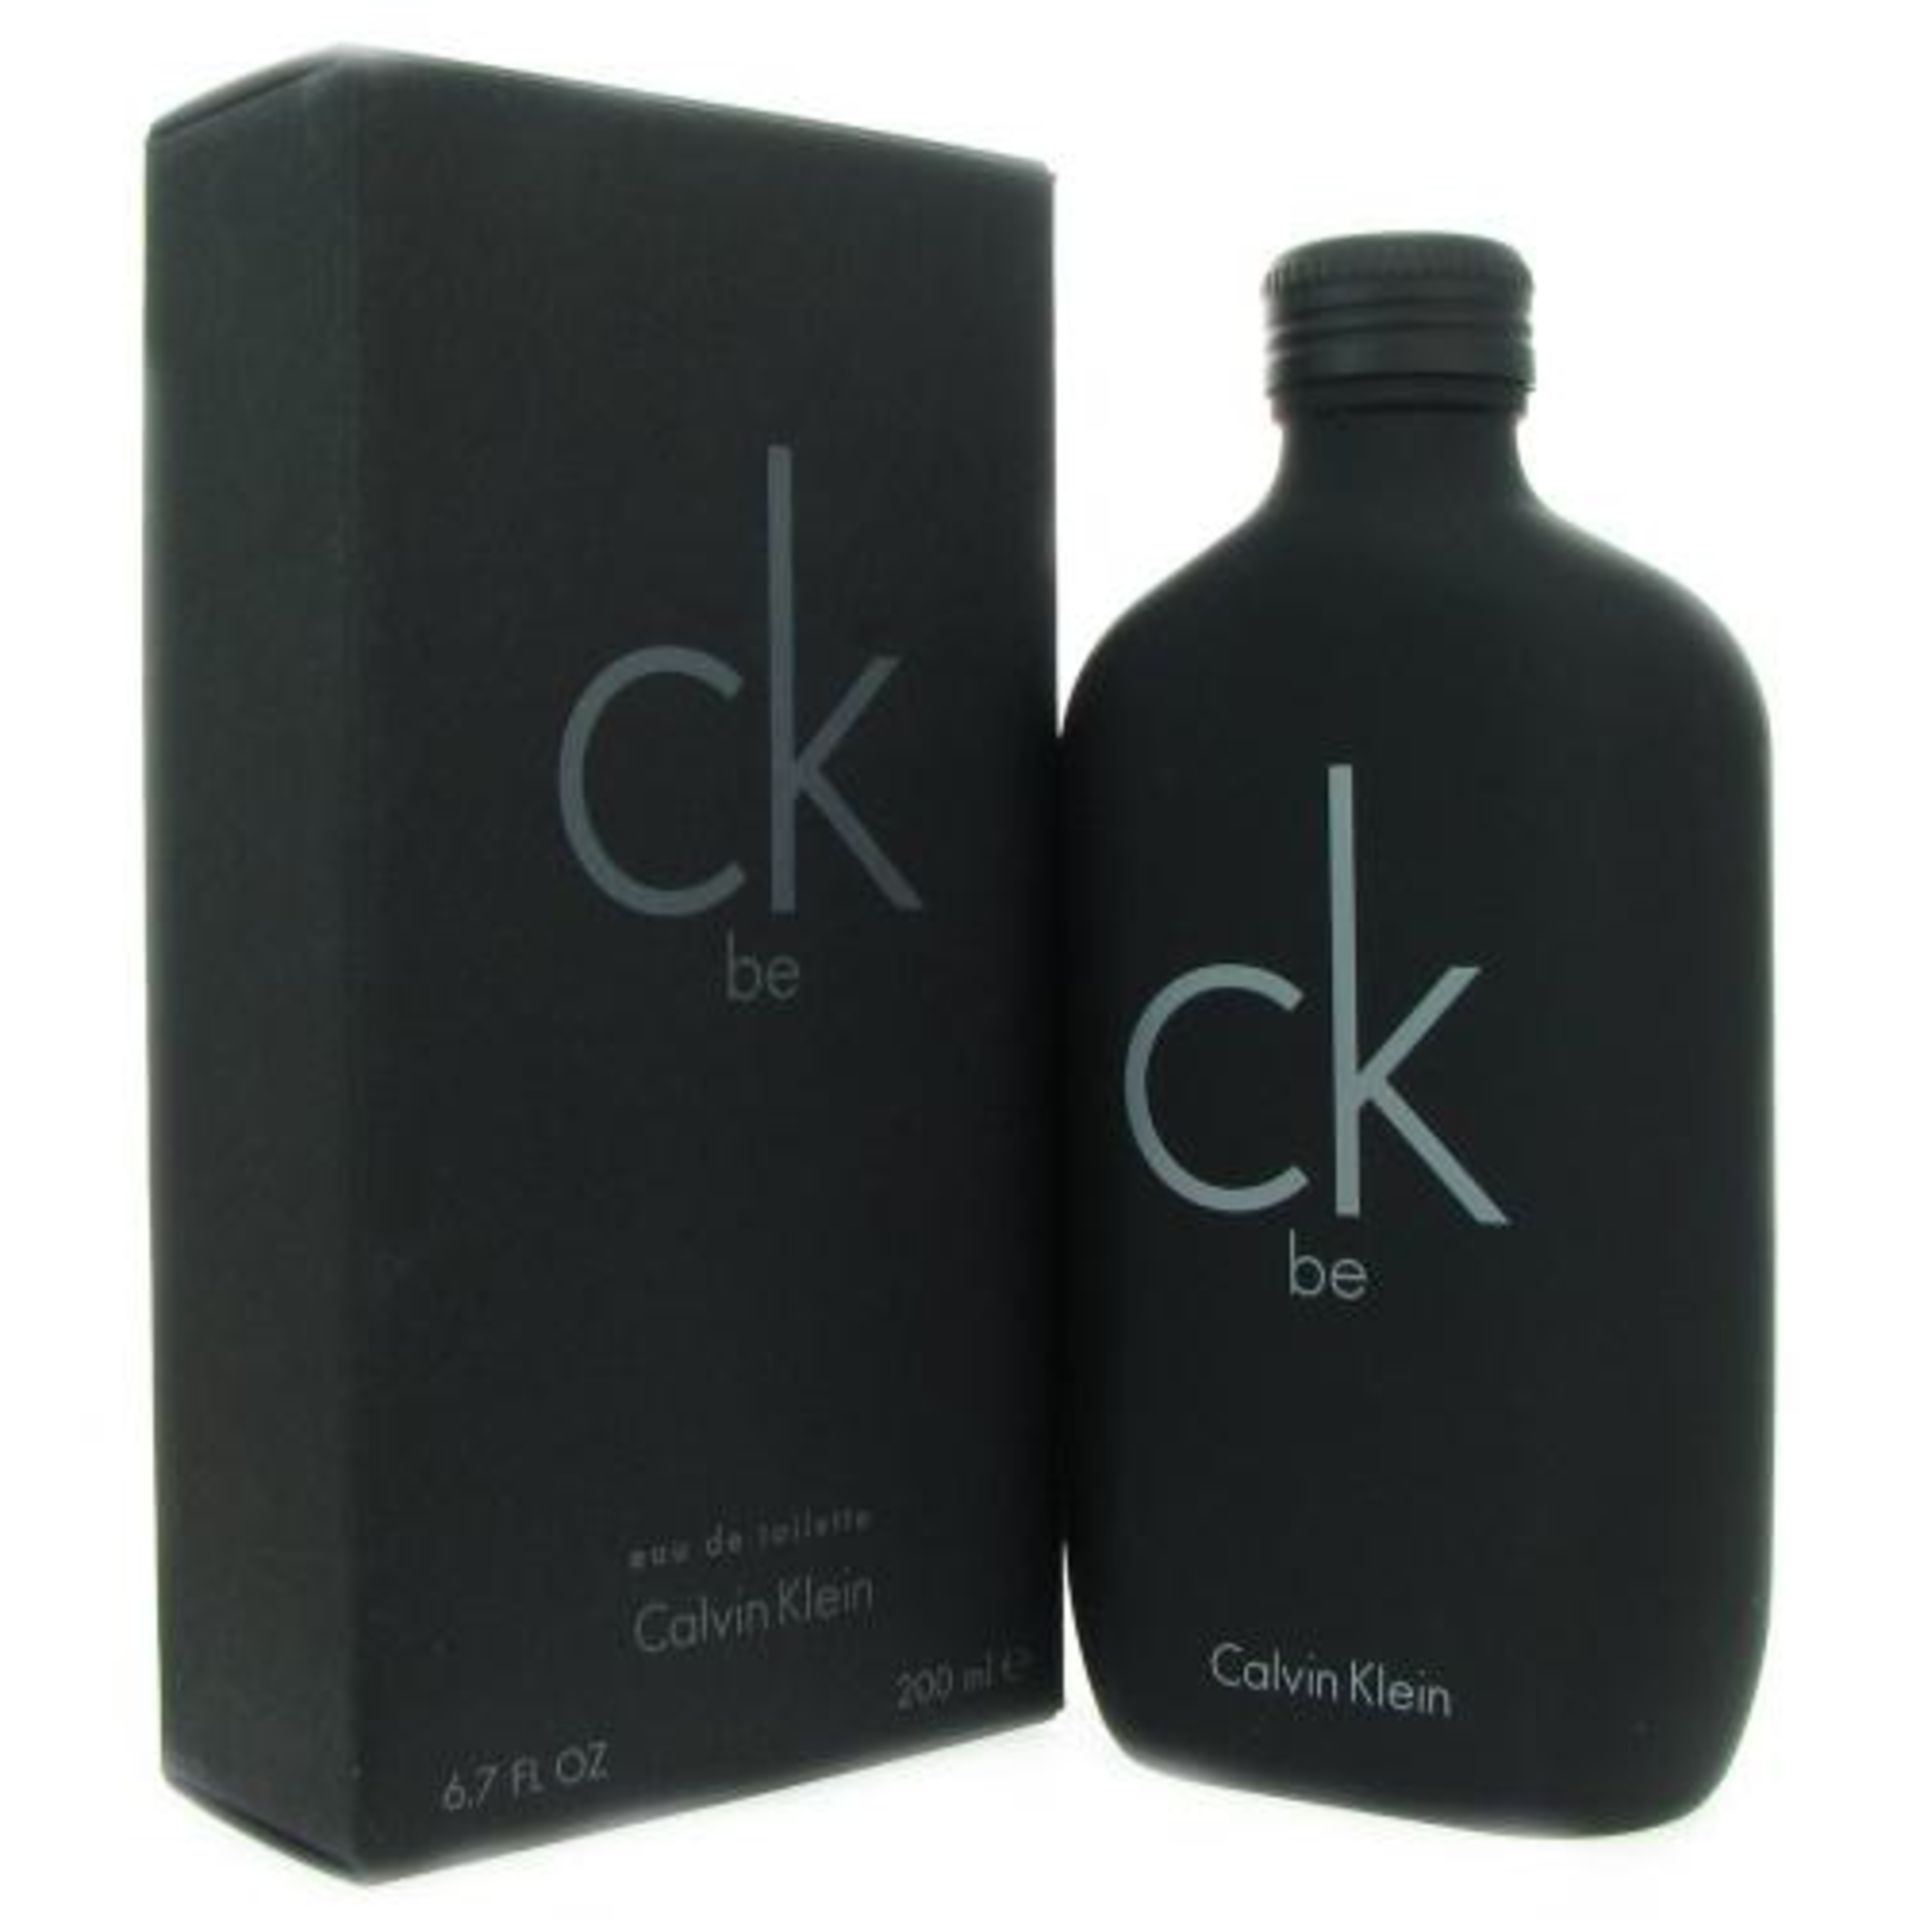 V Brand New CK be By Calvin Klein Eau De Toillette 200ml ISP £34.99 (theperfumeshop) - Image 2 of 2